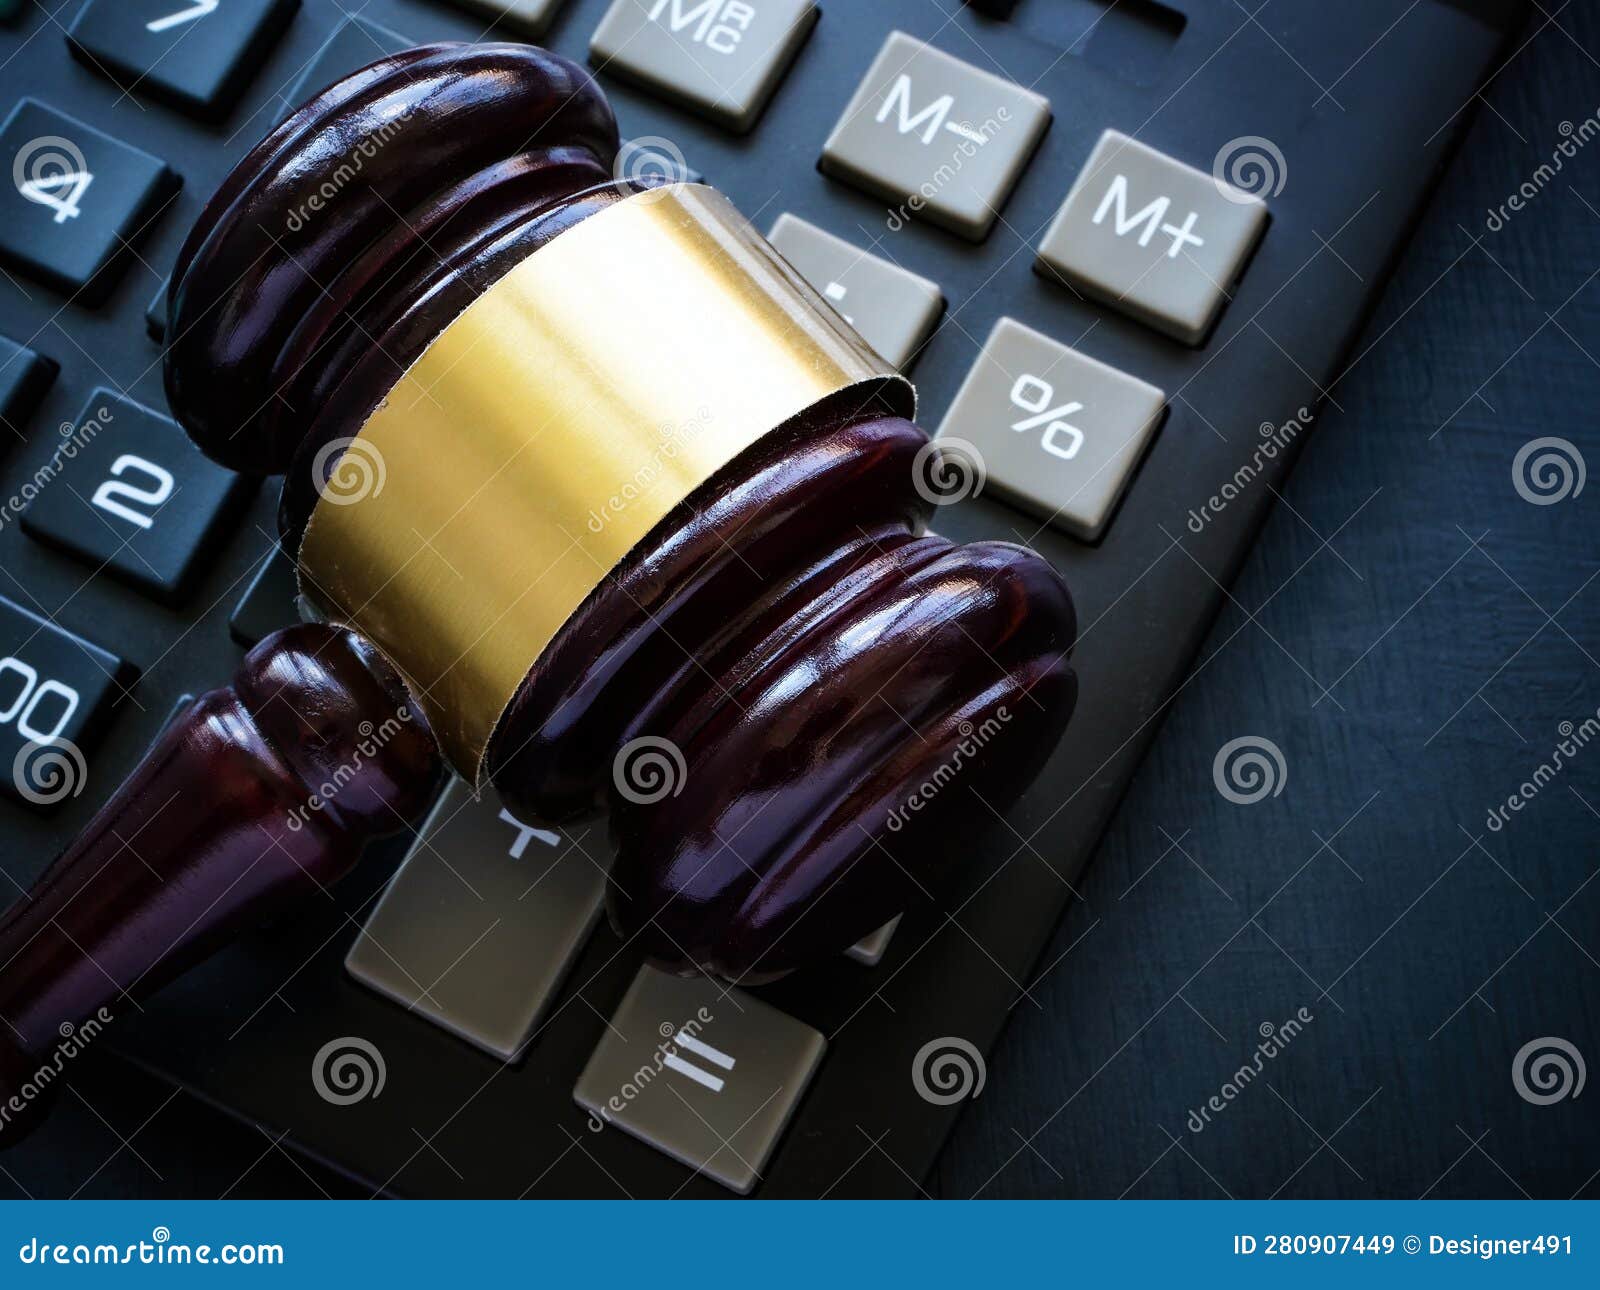 the gavel lies on the calculator as a concept of economic crimes and tax evasion.